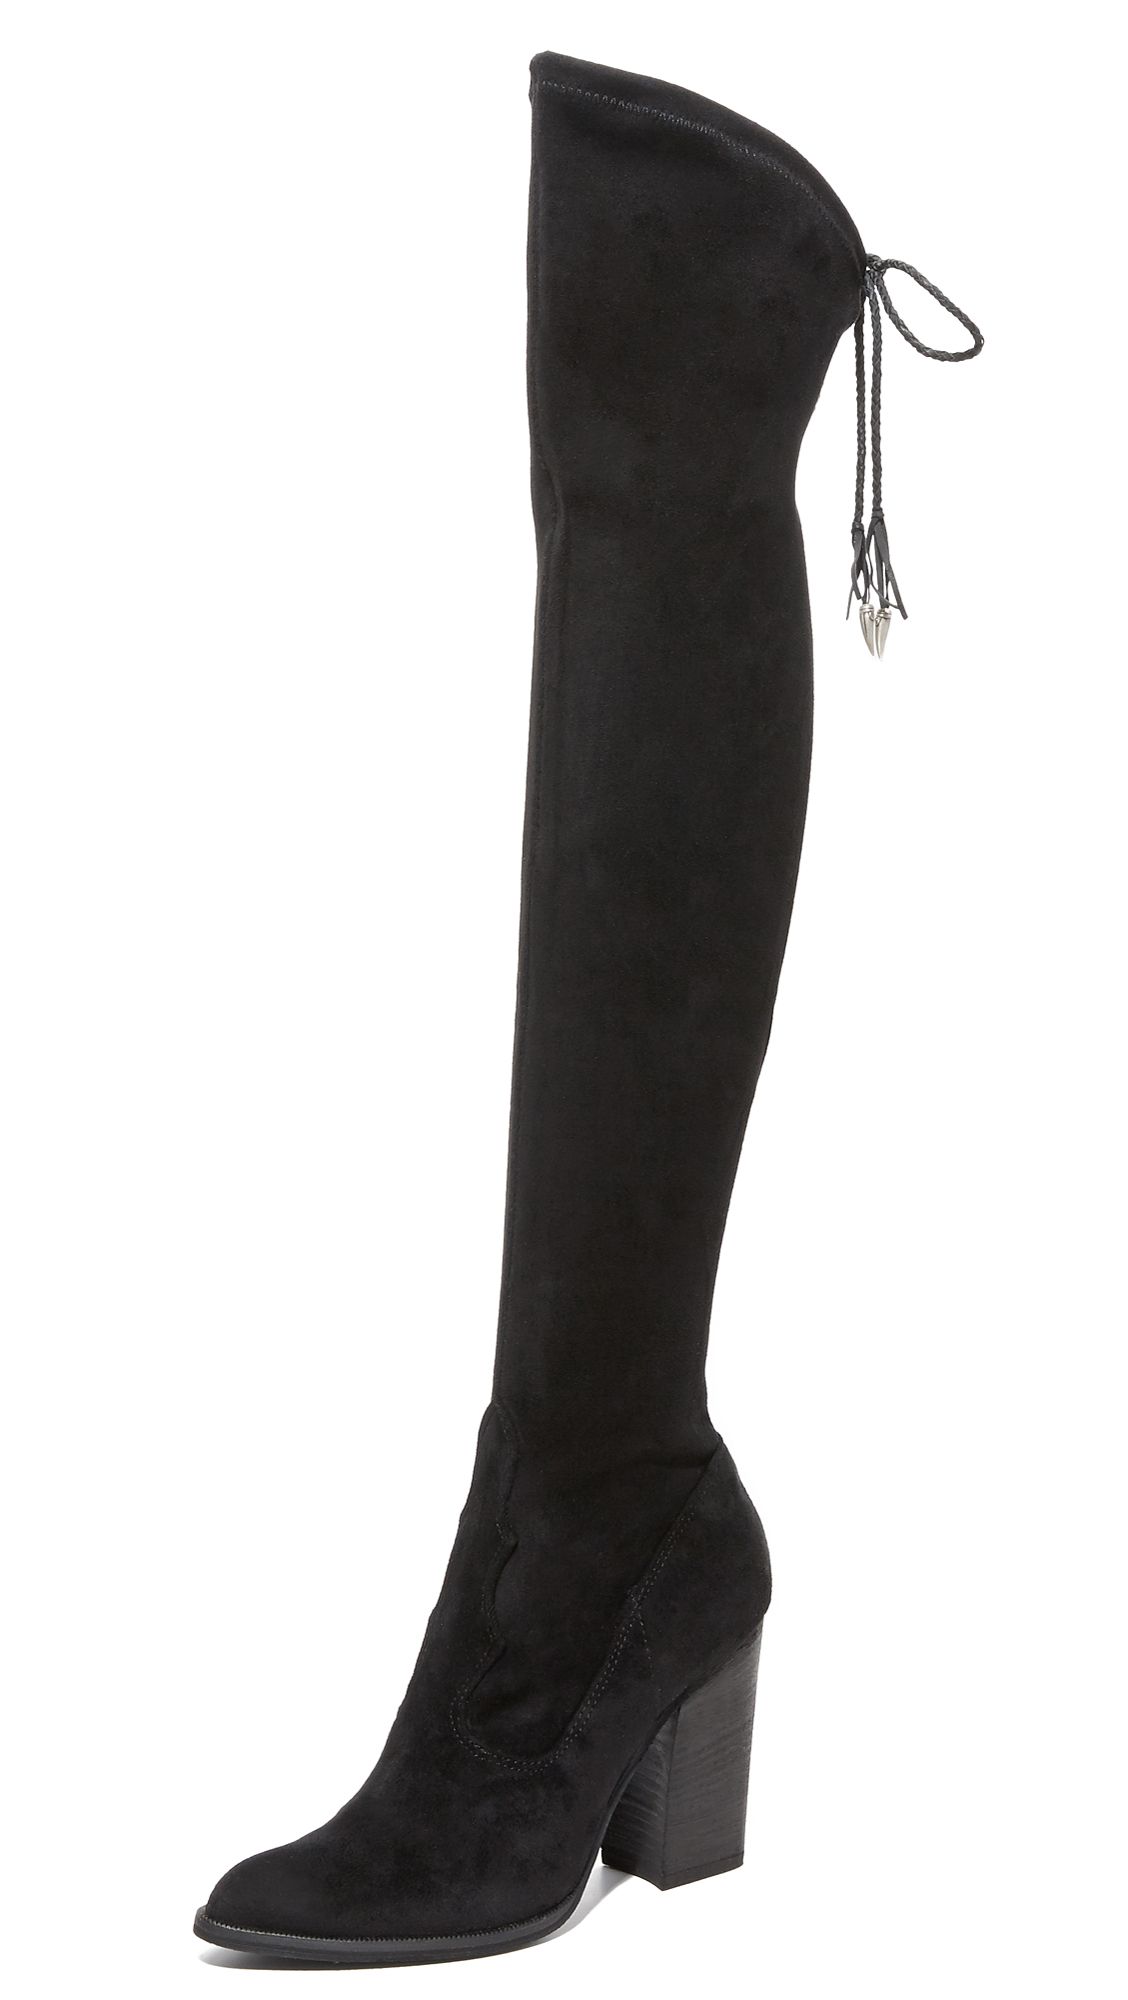 Chance Over the Knee Boots | Shopbop